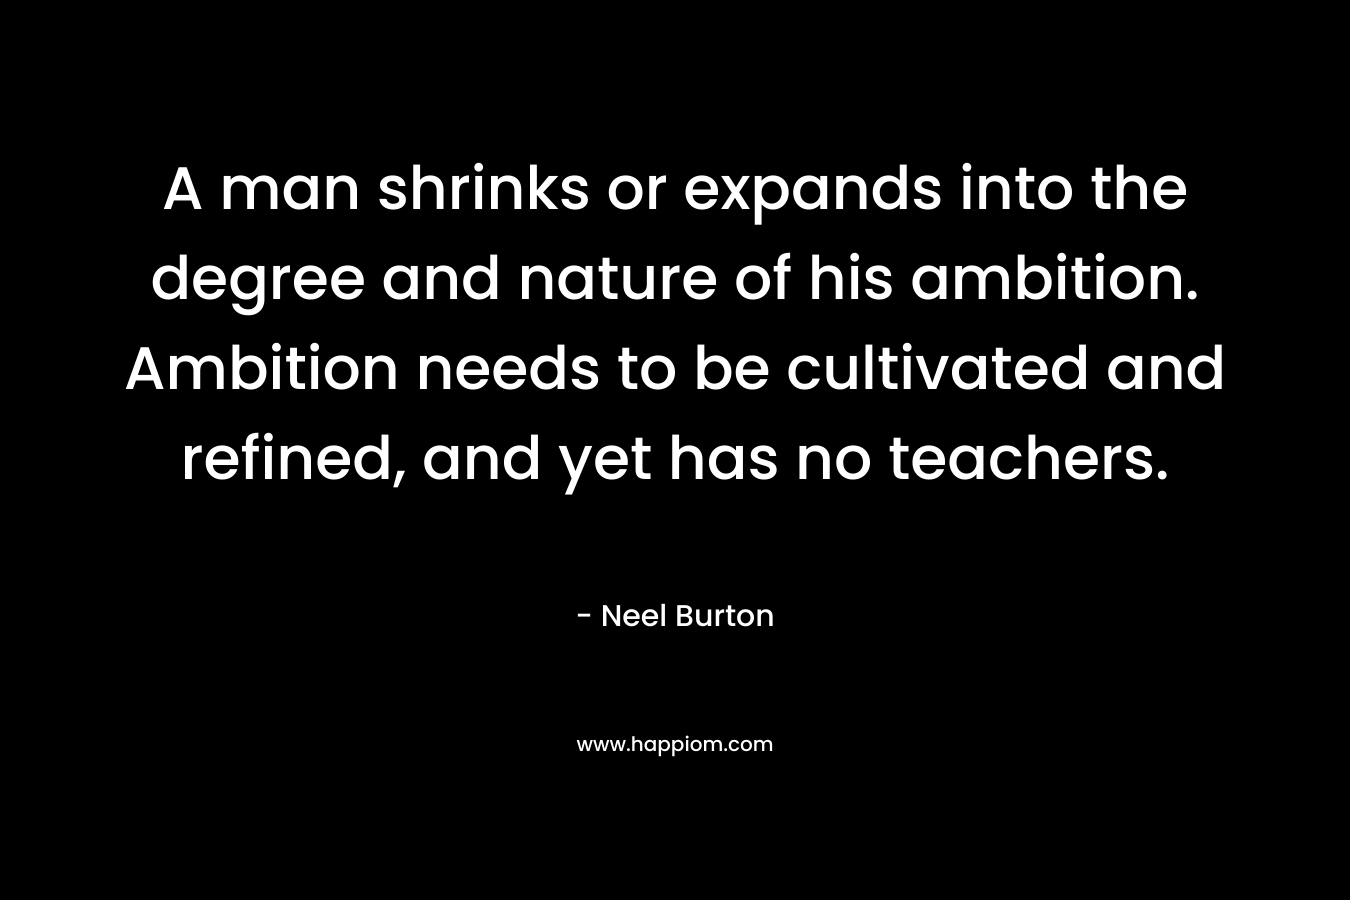 A man shrinks or expands into the degree and nature of his ambition. Ambition needs to be cultivated and refined, and yet has no teachers. – Neel Burton